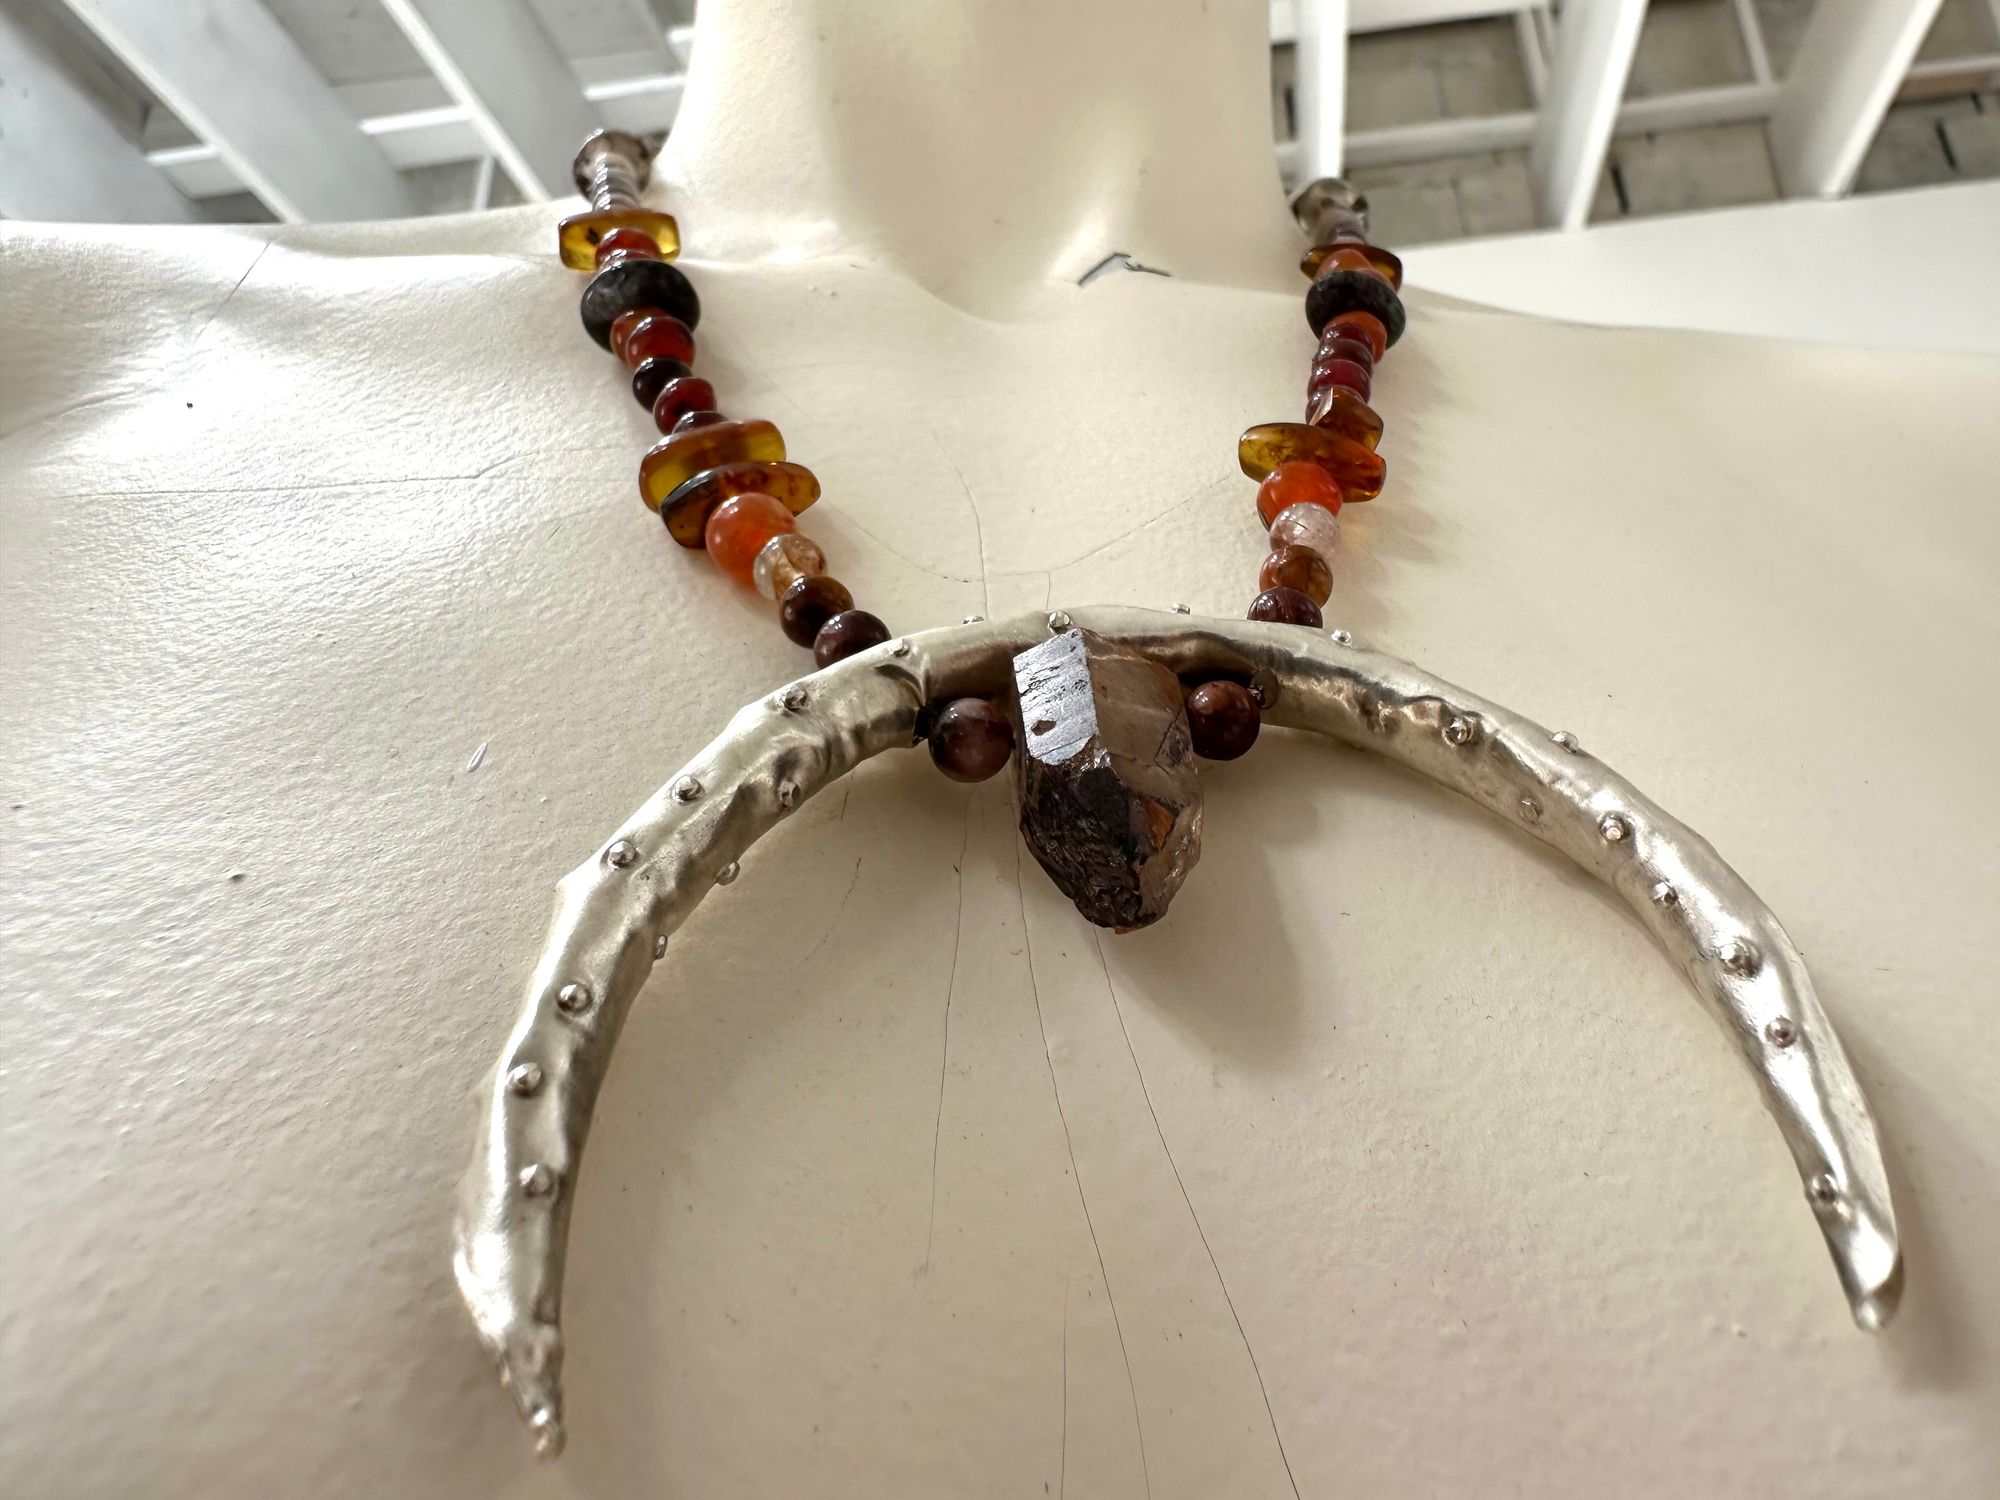 A painted white mannequin wears a necklace with a silver Crescent moon shape And beats of Amber Quartz and agate in soft warm earth tones